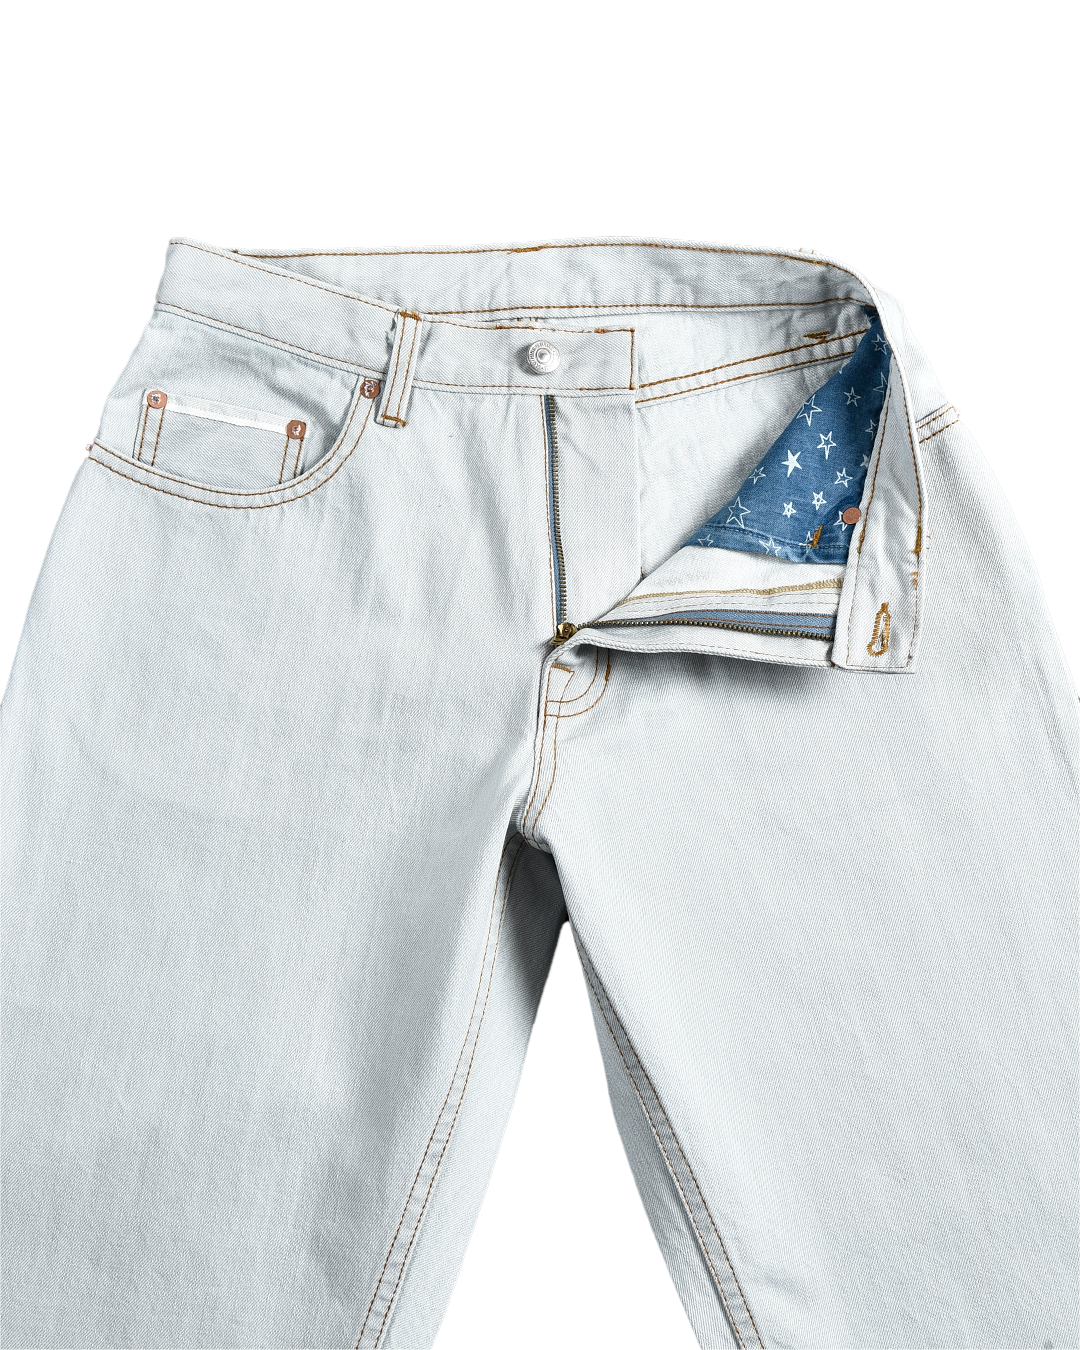 Front open view of mens jeans by Luxire in fade washed indigo with turquoise tint